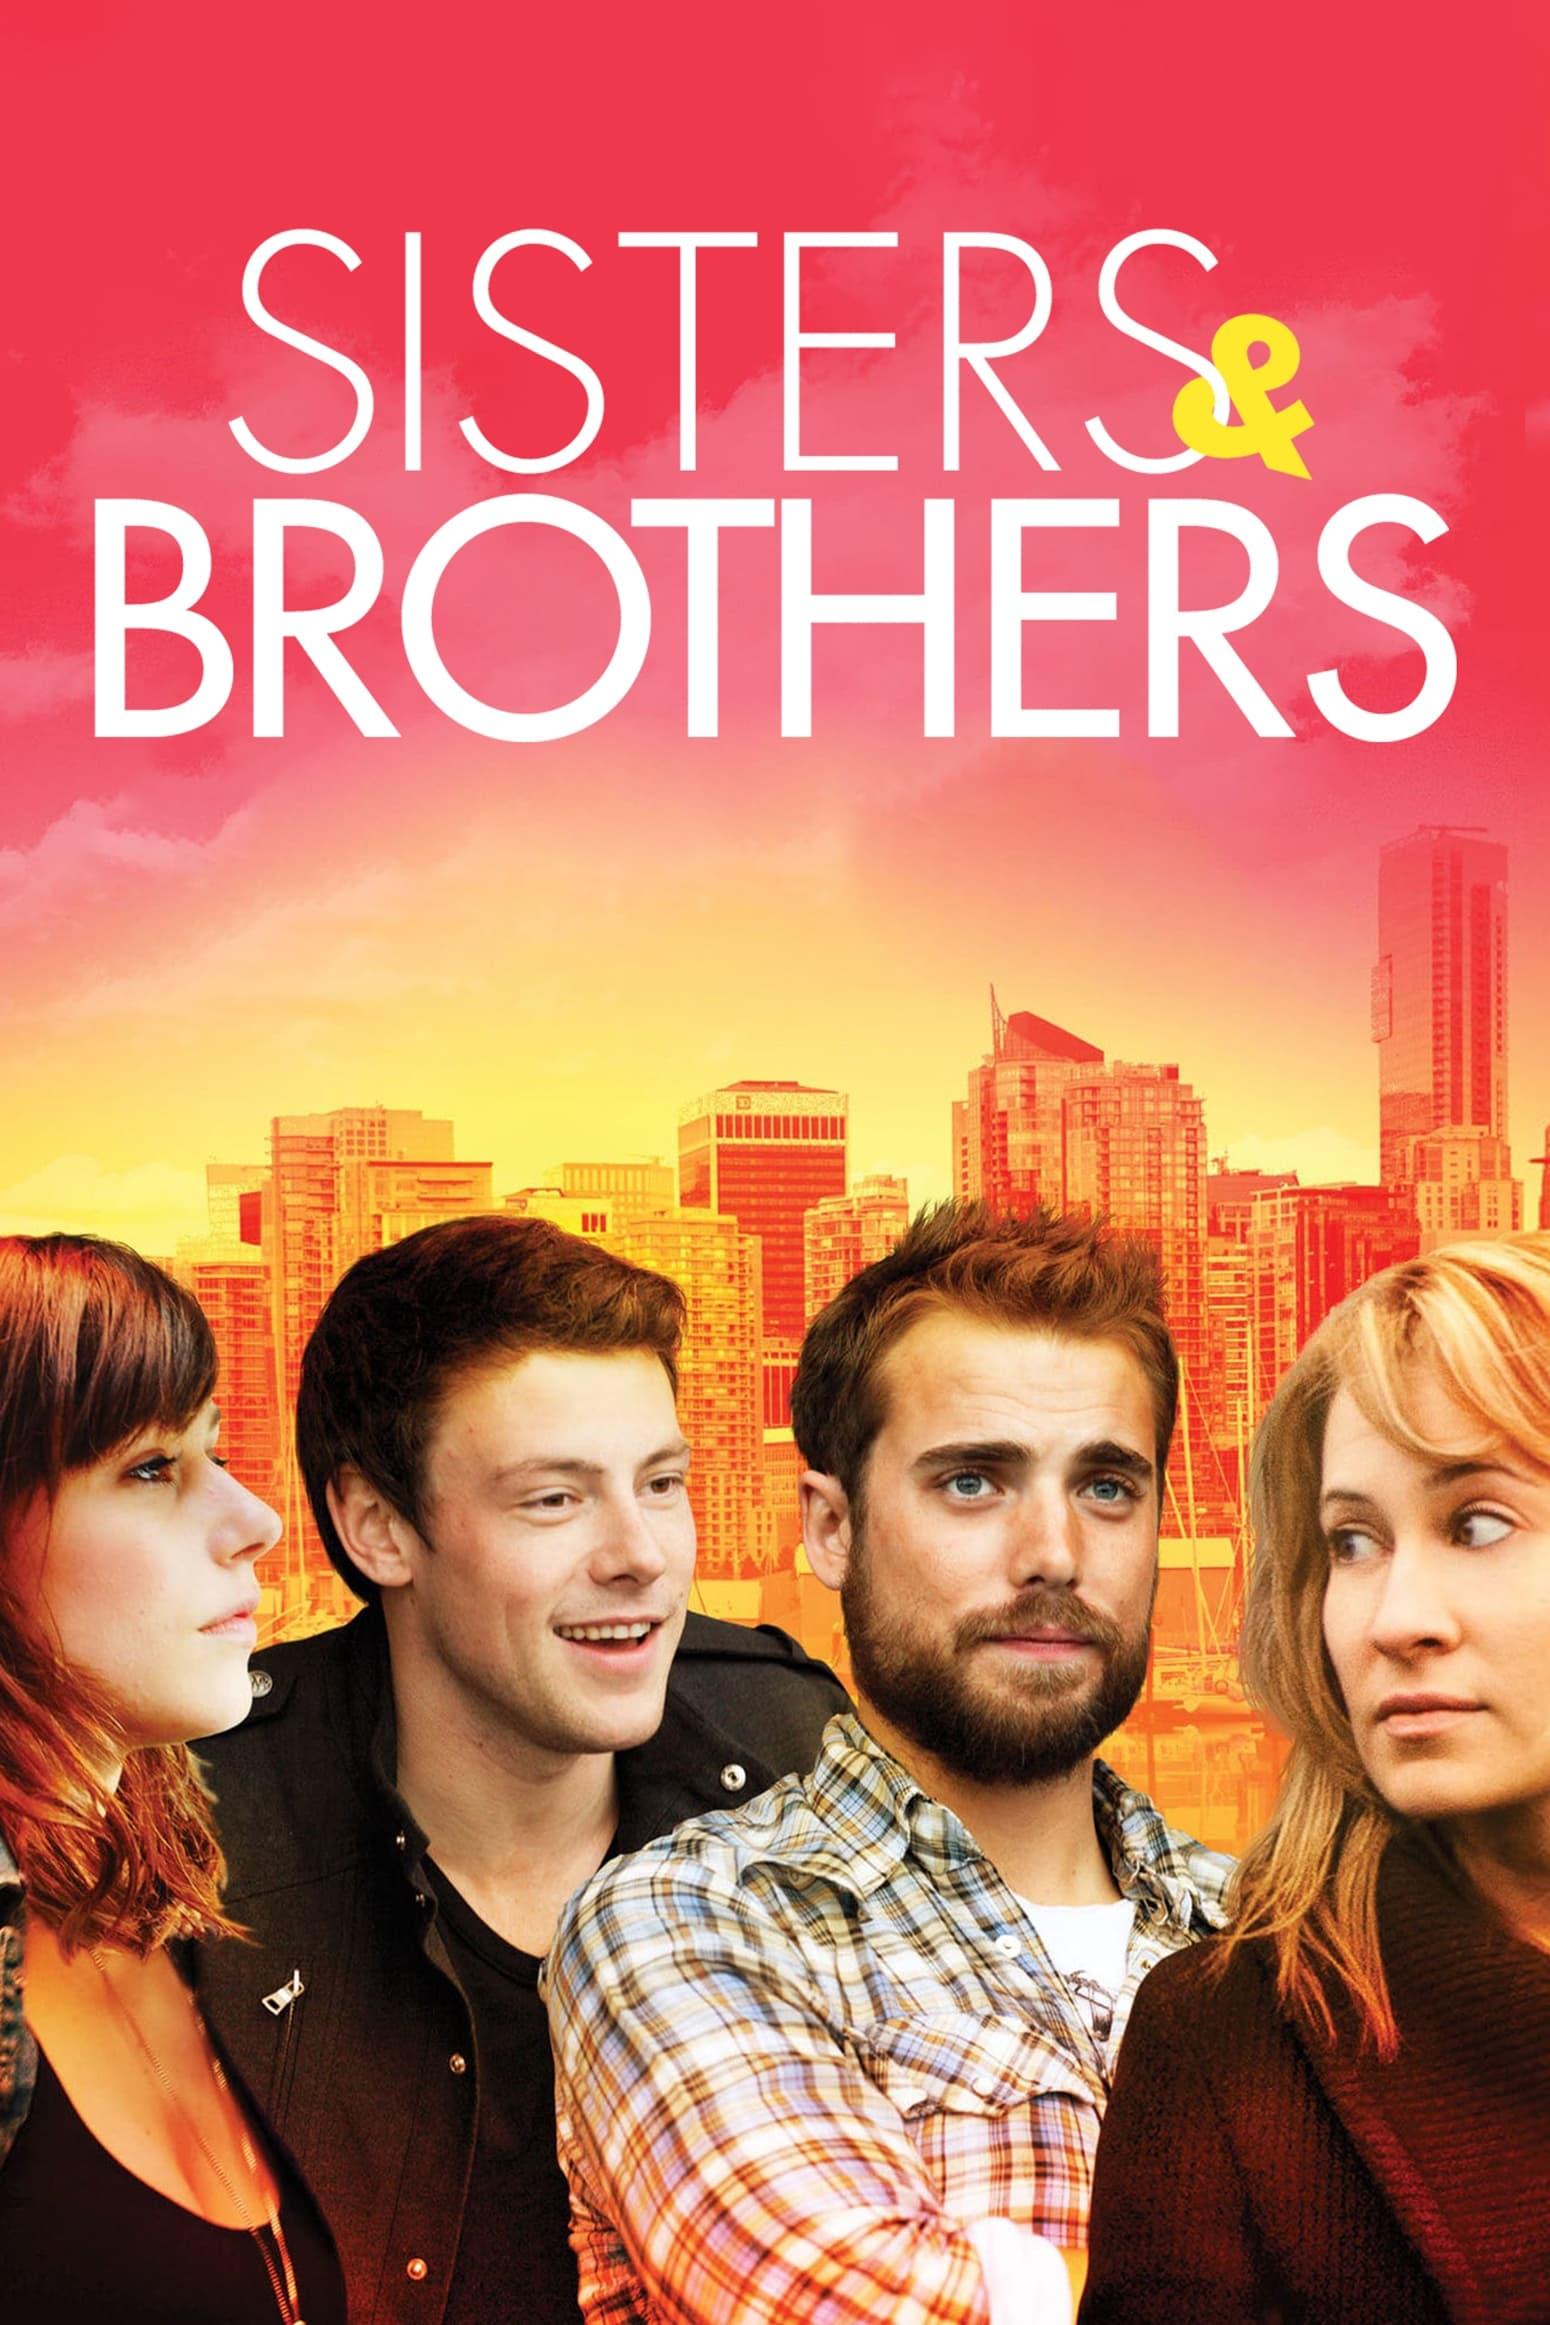 Sisters & Brothers poster